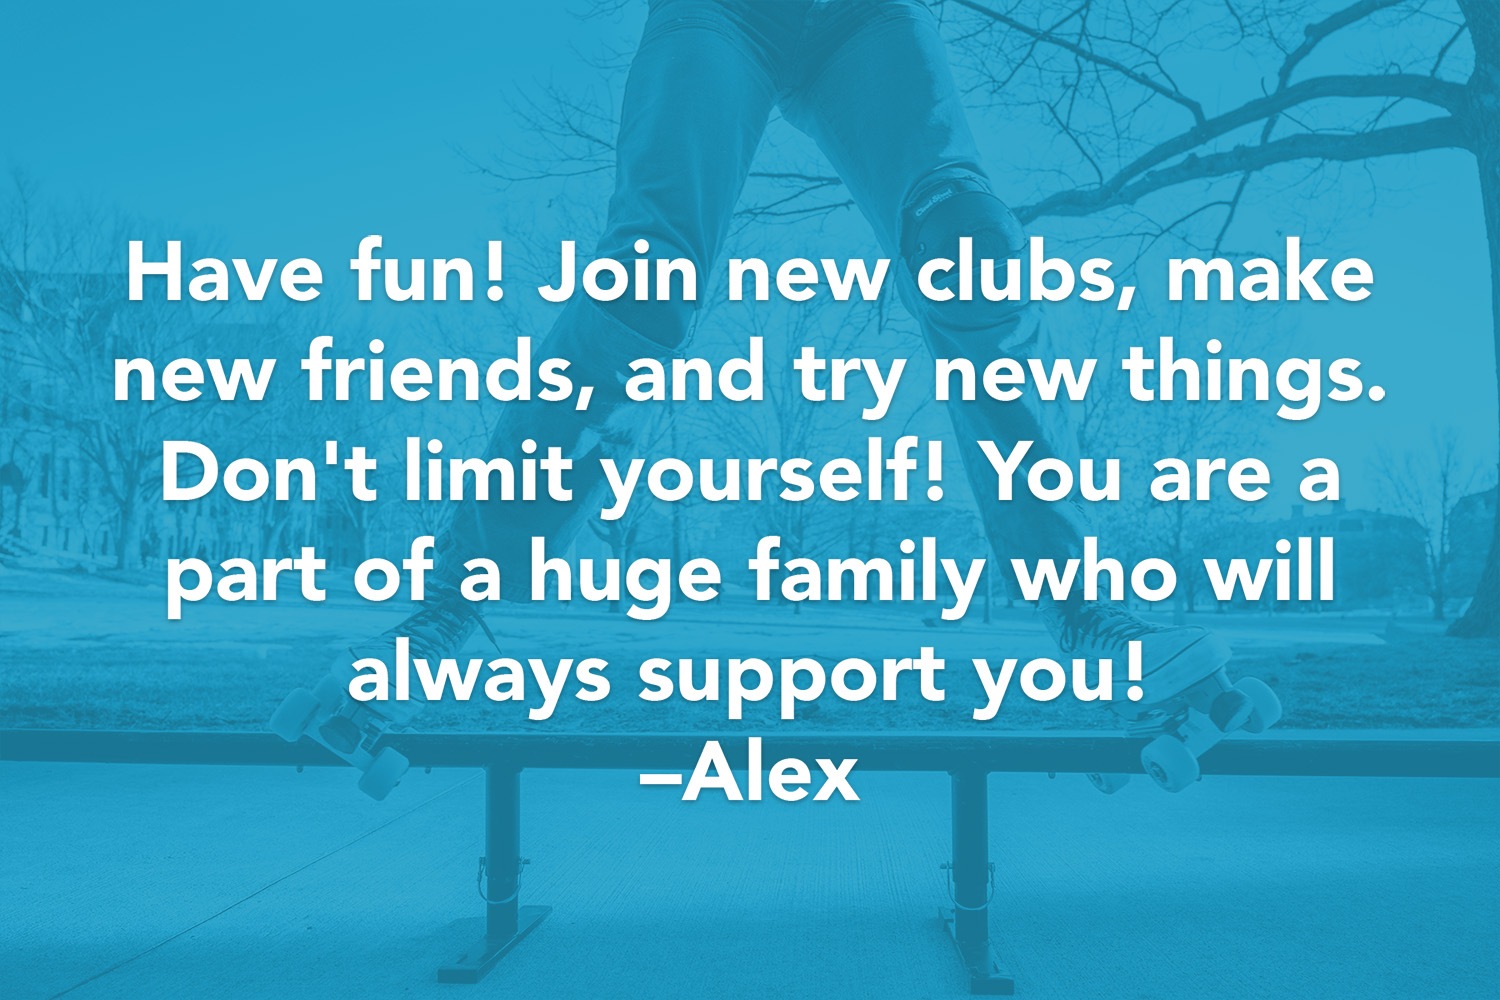 Have fun! Join new clubs, make new friends, and try new things. Don't limit yourself! You are a part of a huge family who will always support you! -Alex